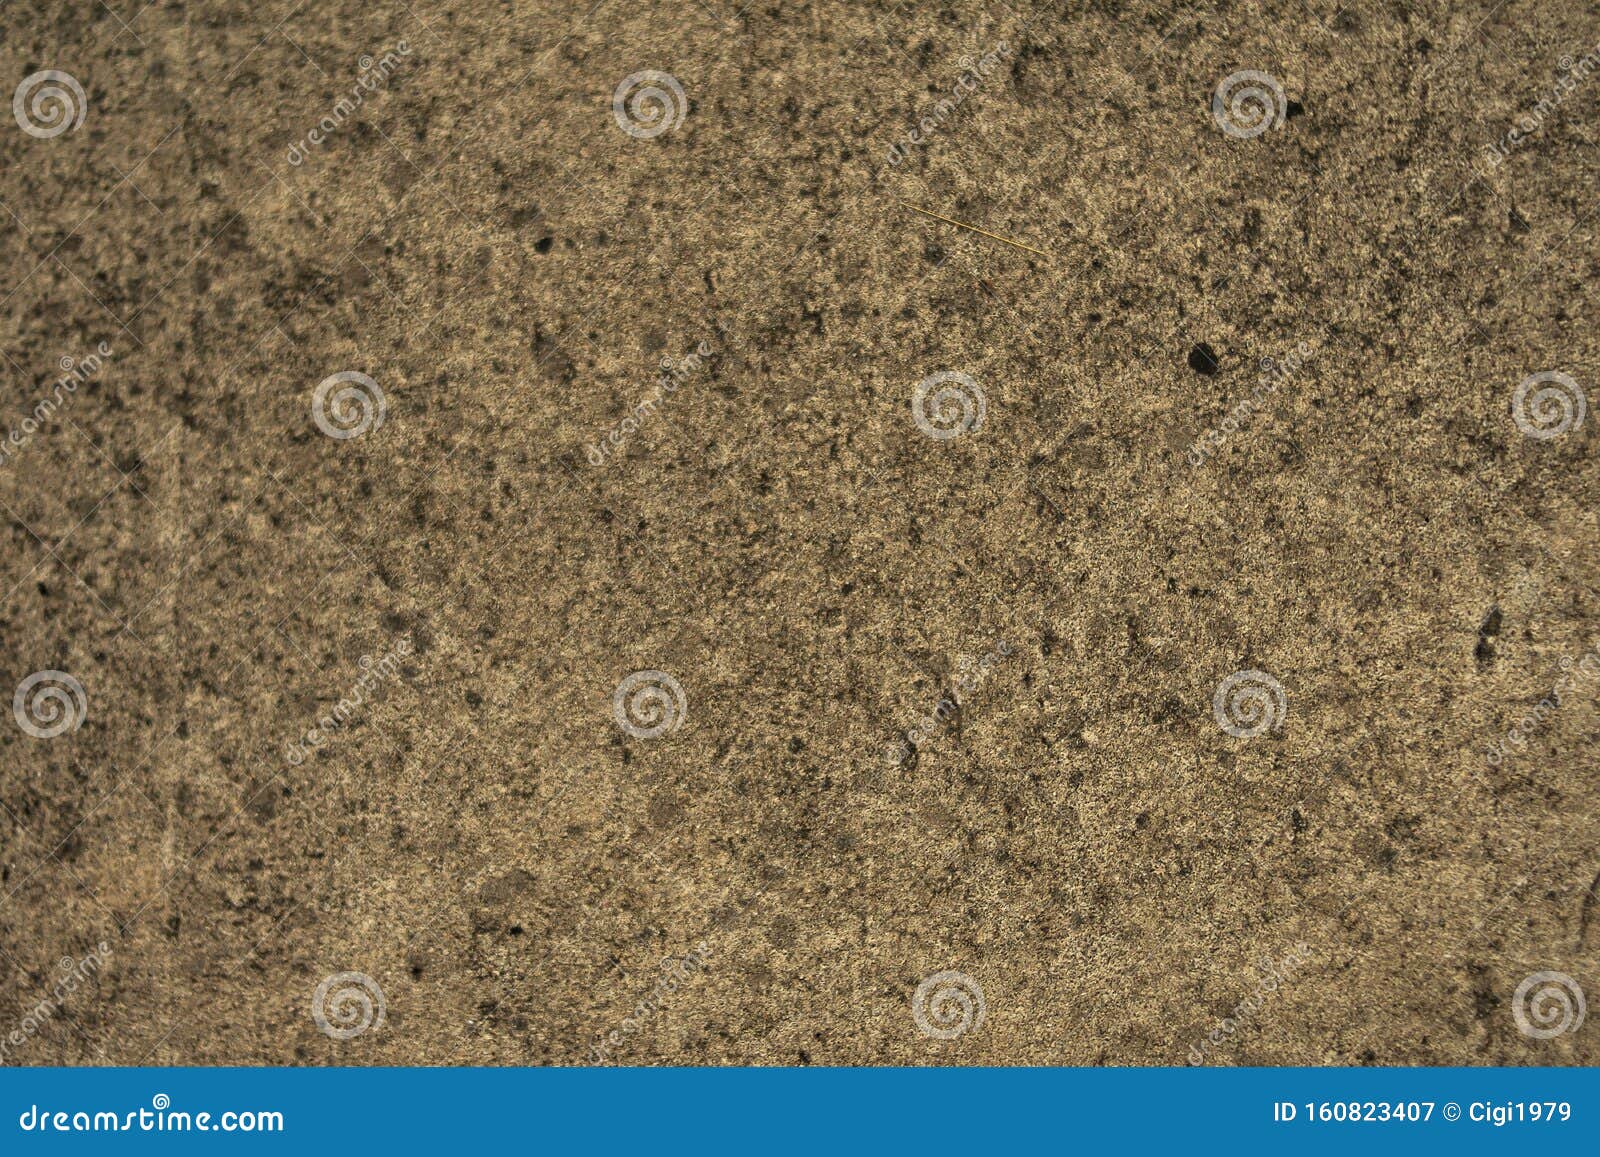 Brown Wallpaper with Golden Rough Texture Stock Image - Image of ...